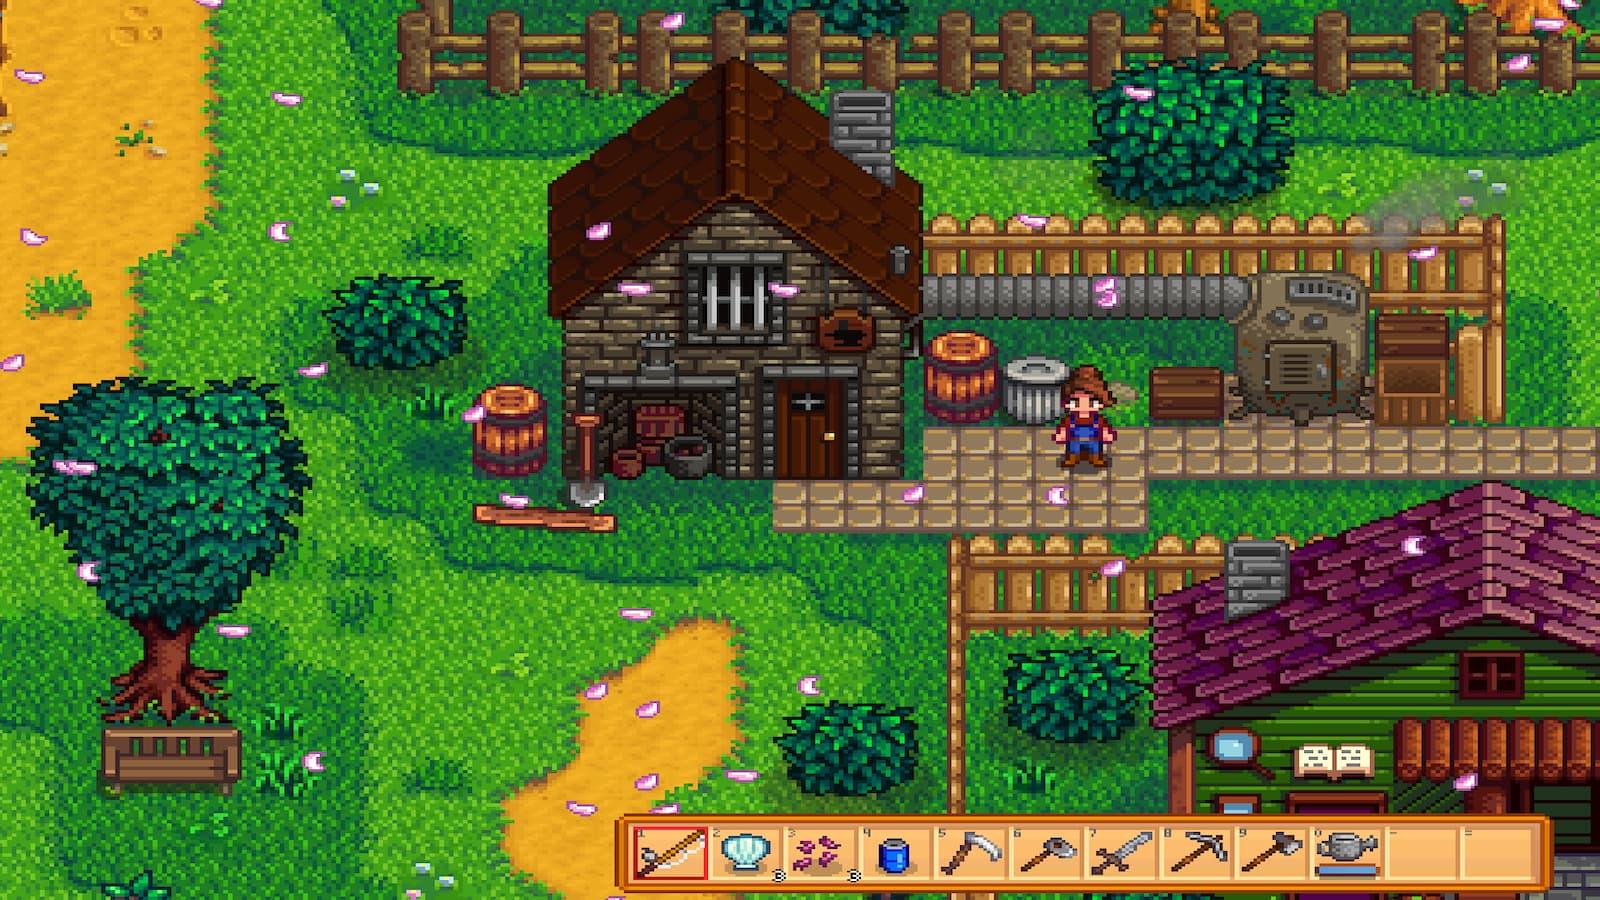 Blacksmith and tools in Stardew Valley